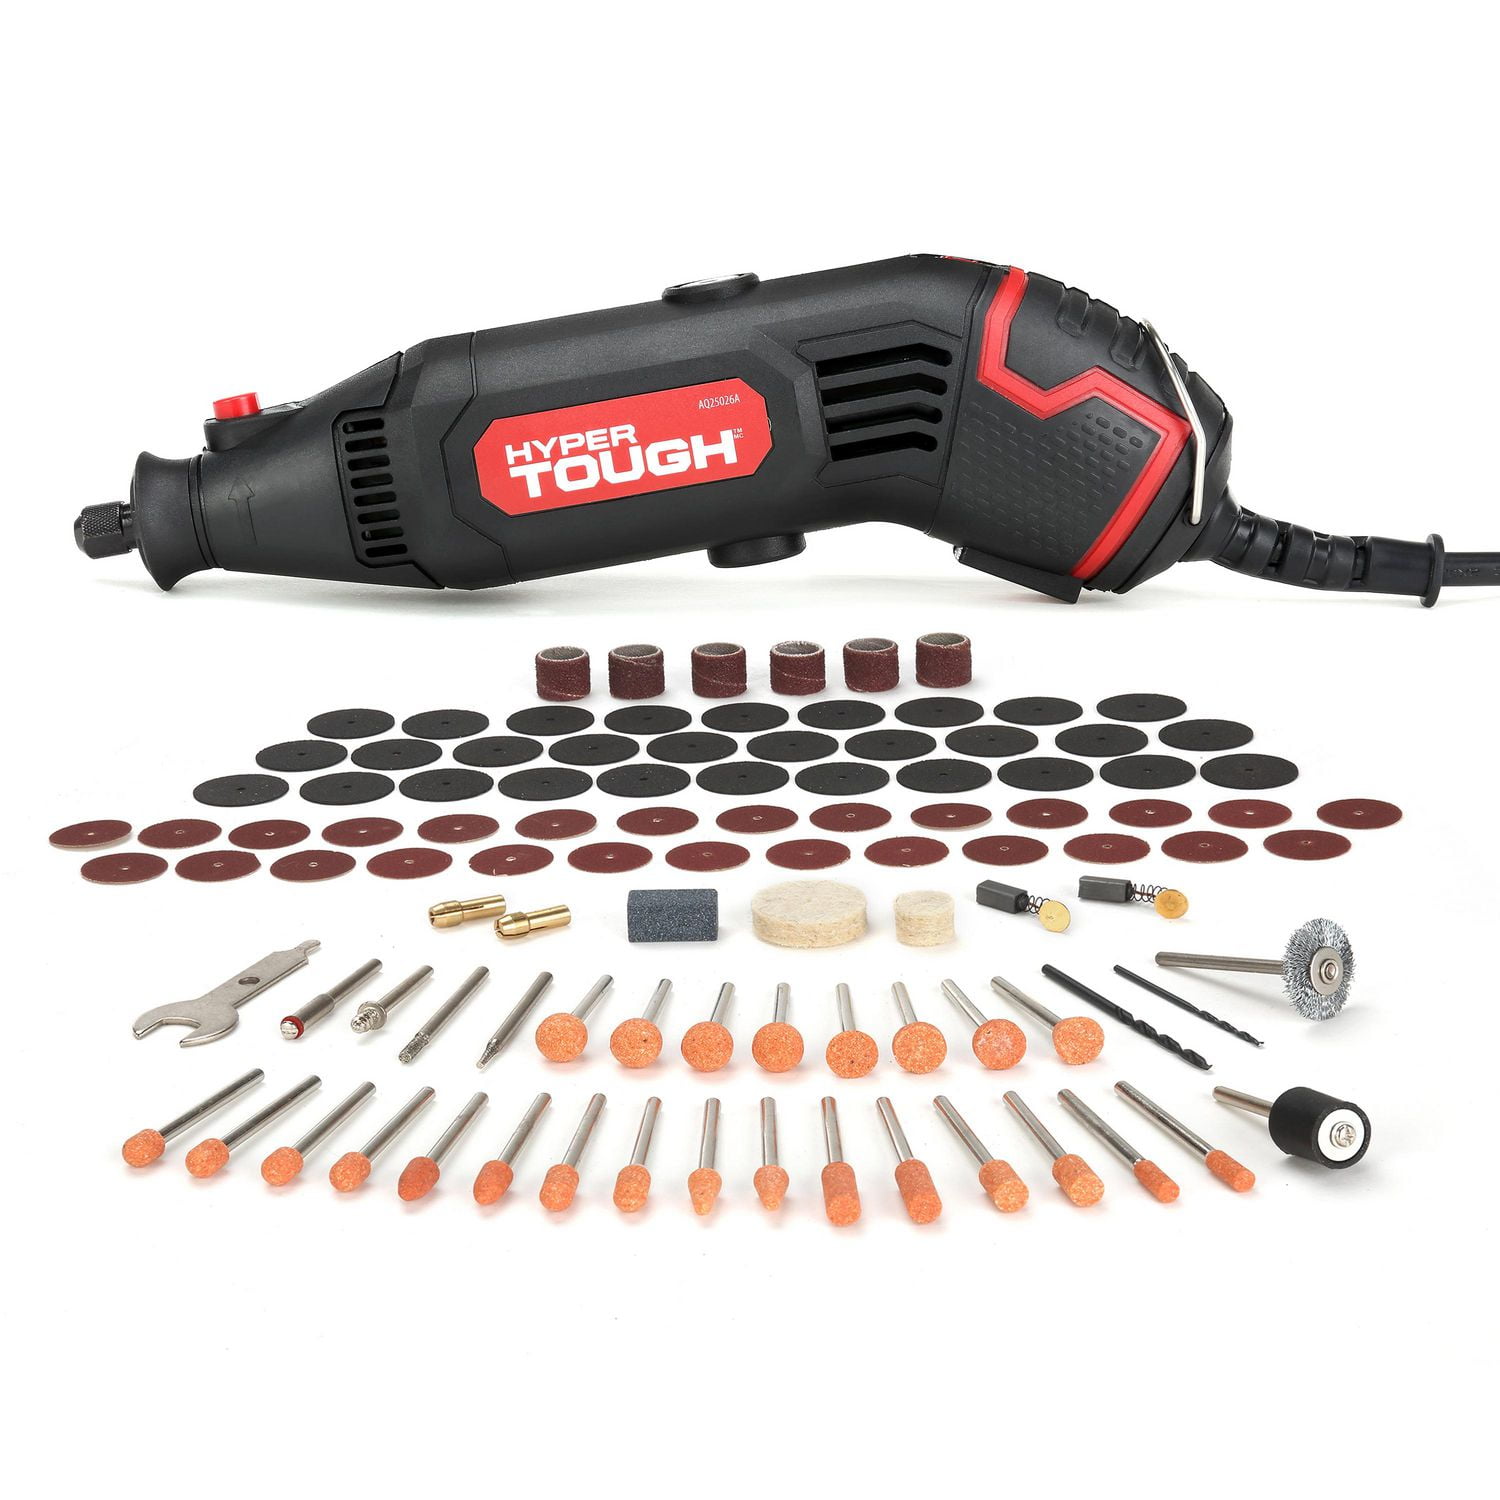 You Can Get Tools and Equipment for as Low as $1 at Harbor Freight Right Now